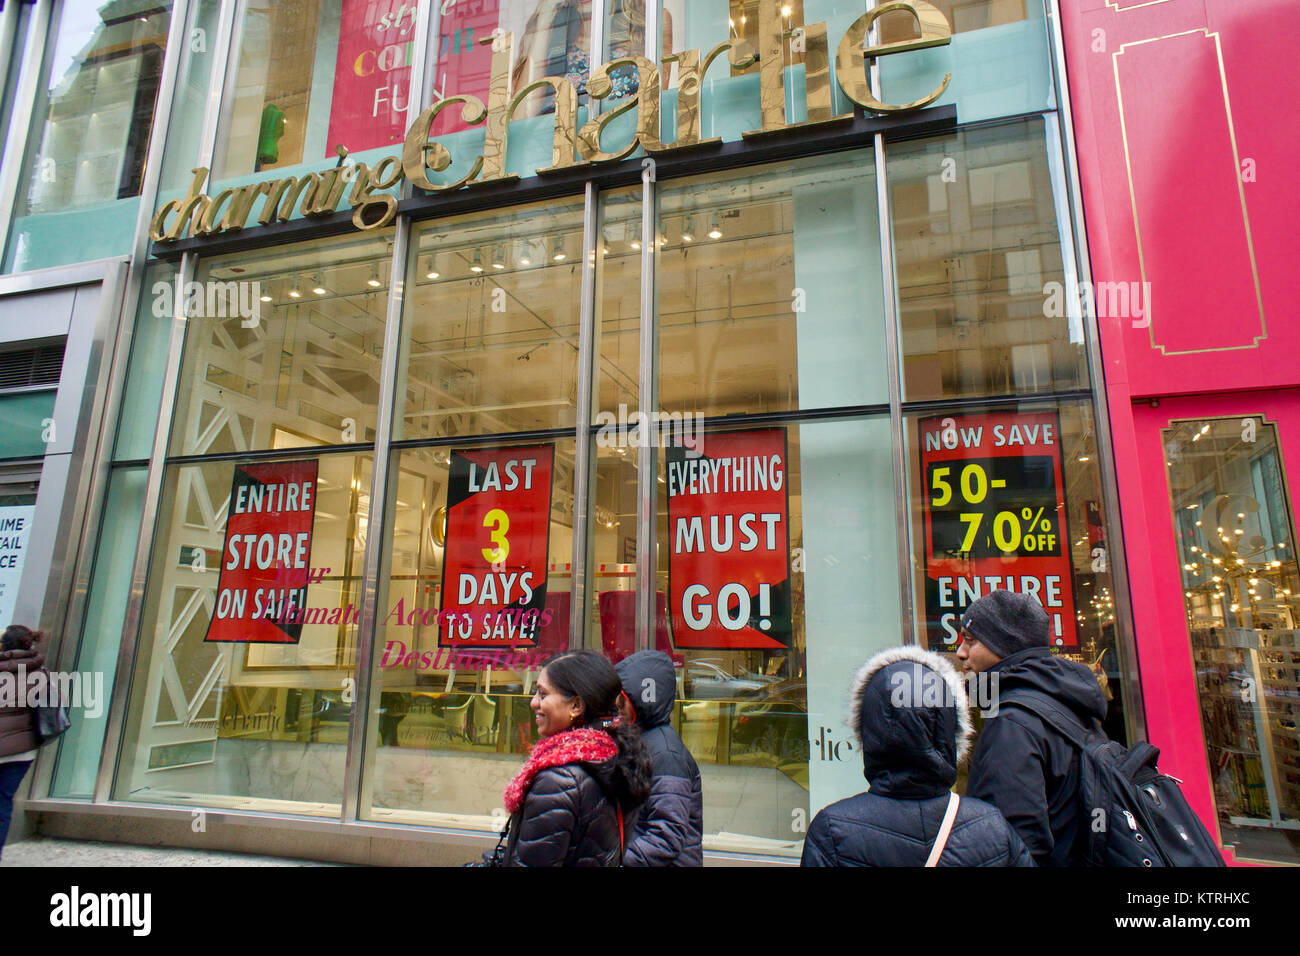 A Charming Charlie store in Midtown Manhattan in New York on Sunday, December 24, 2017. The retailer has recently filed for Chapter 11 bankruptcy protection and will close some stores. (© Richard B. Levine) Stock Photo